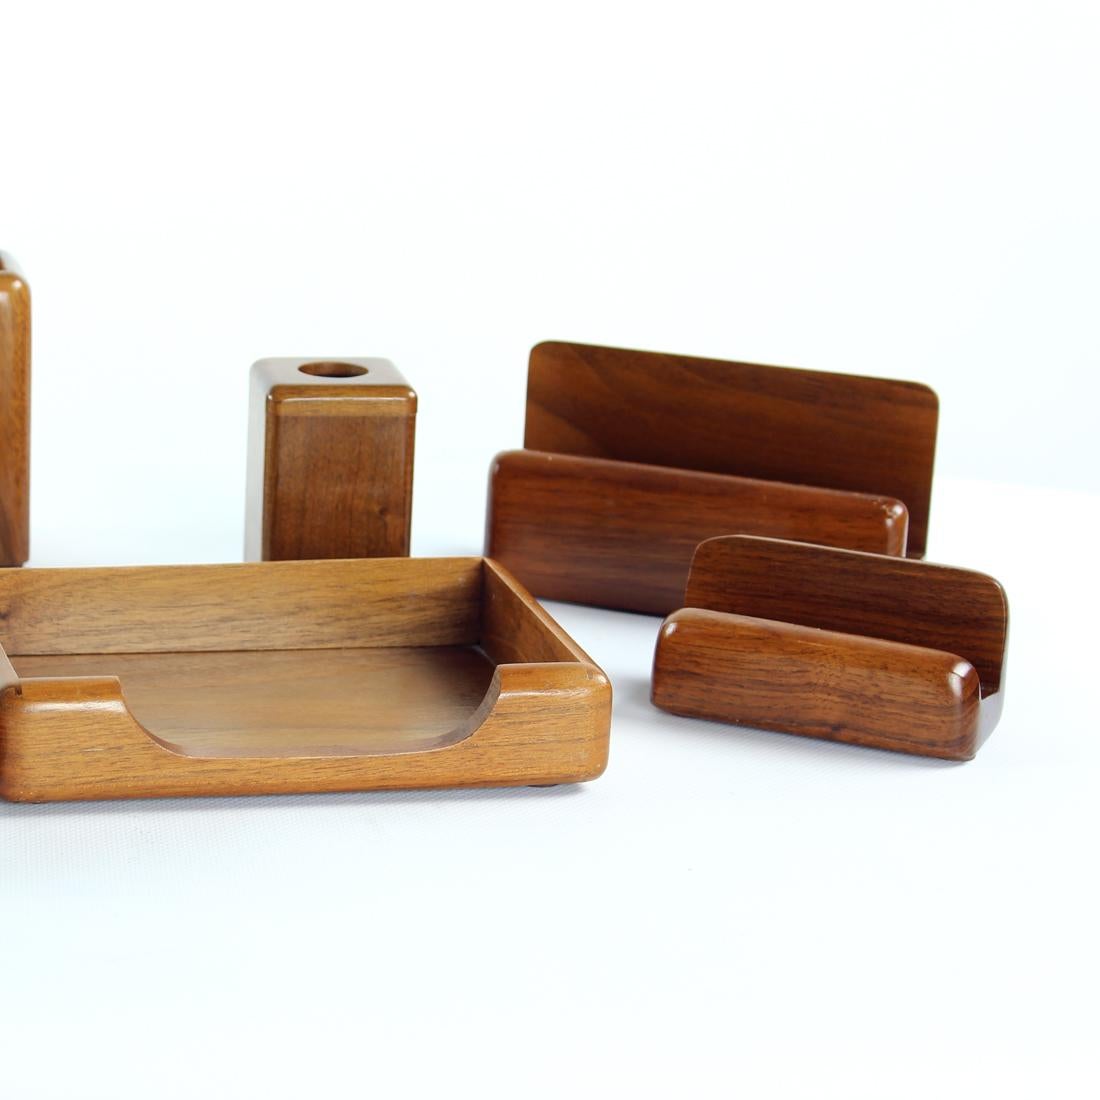 Beautiful vintage desk set produced in Czechoslovakia and marked as INKA, as an original label. Trully a beautiful set made completely out of walnut wood. The set consists on a paper holder, pen holder (cup), pensil holder, card holder, little